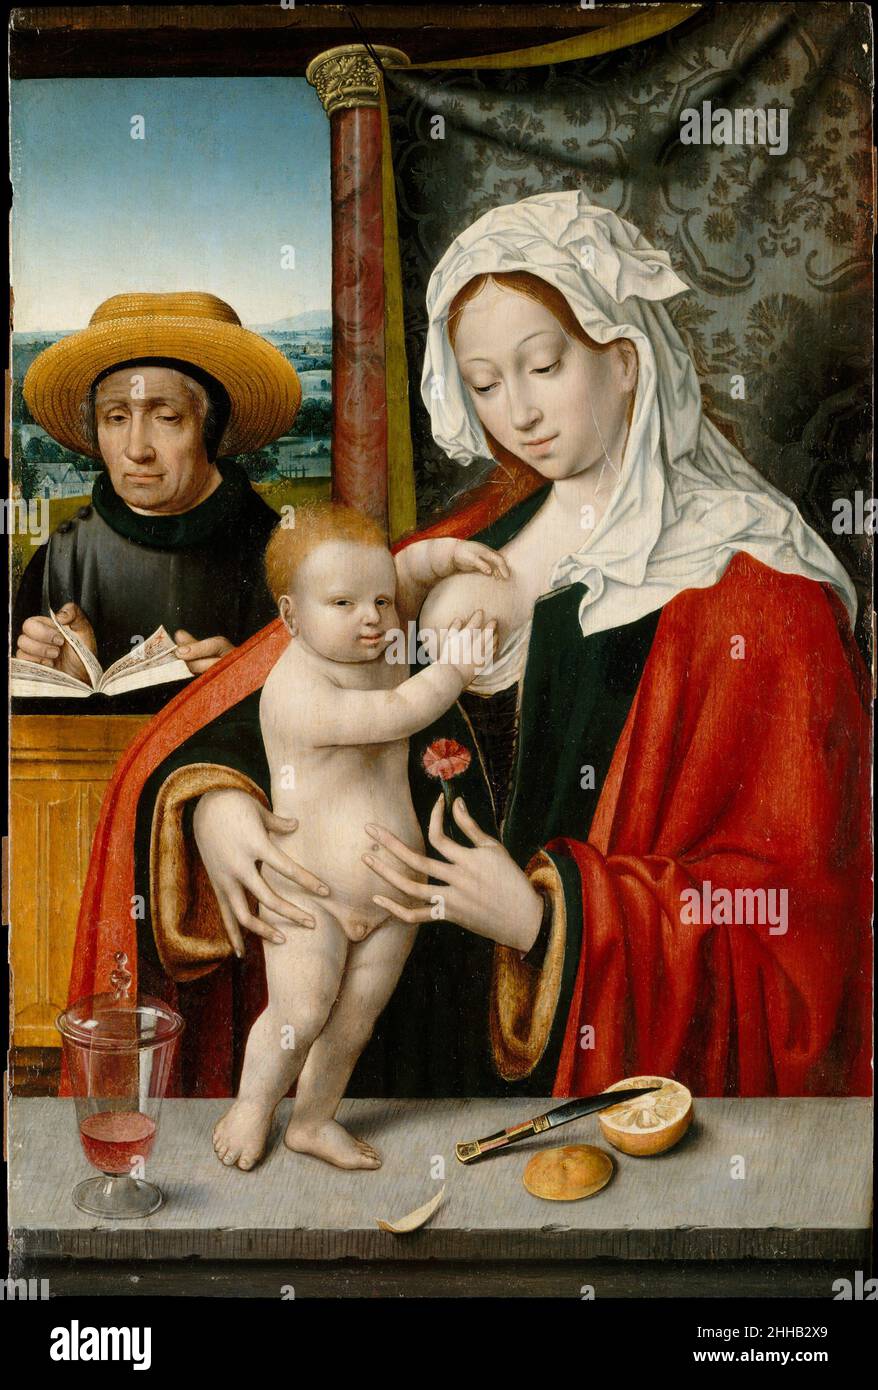 The Holy Family possibly 1527–33 Workshop of Joos van Cleve Netherlandish Joos van Cleve (Netherlandish, Cleve ca. 1485–1540/41 Antwerp) and his workshop were prolific in their creation of depictions of the Holy Family. Of the many versions of this subject produced by the master and his studio, the Lehman picture can be placed within a smaller subgroup featuring a landscape view behind Saint Joseph as well as an upright Christ Child. The Joos van Cleve workshop and their followers included subtle – and sometimes more dramatic – variations on this popular scene, other examples of which can be s Stock Photo